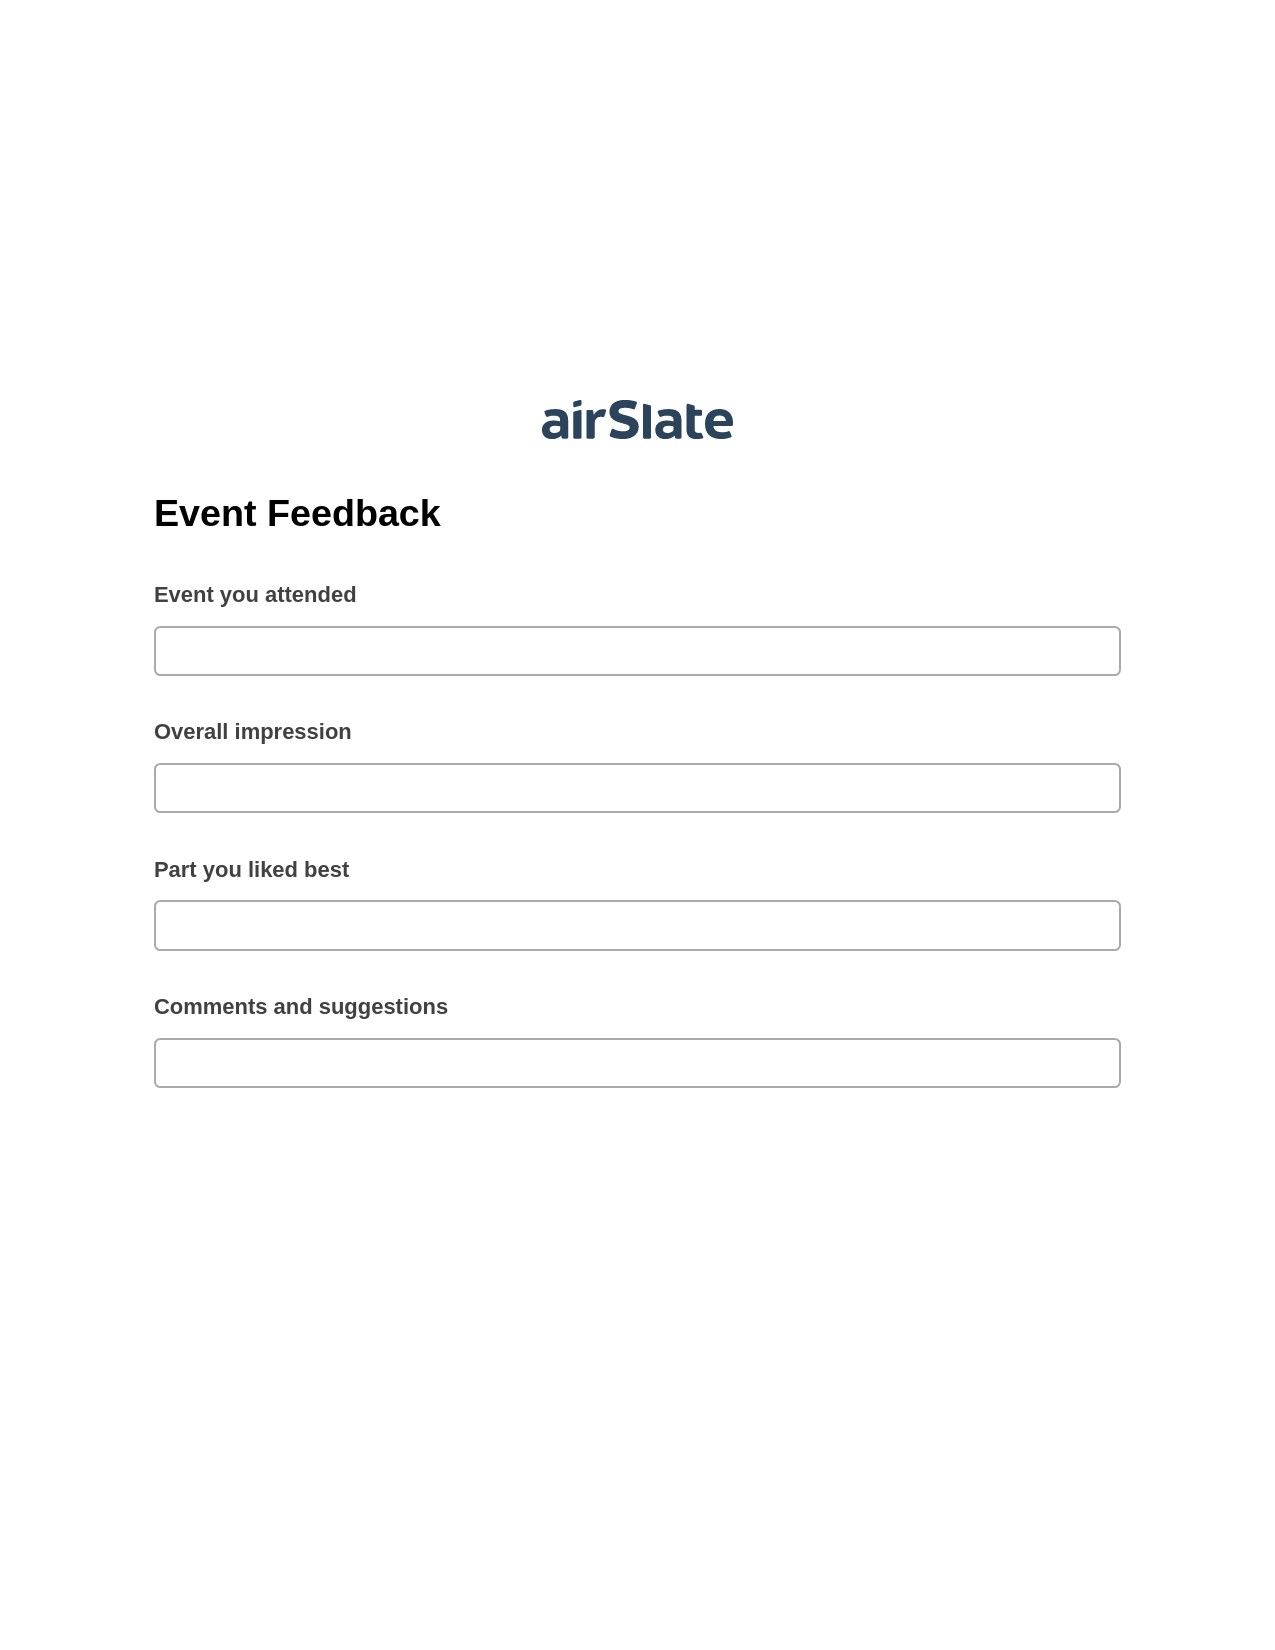 Event Feedback Pre-fill Dropdowns from Excel Bot, Create slate addon, Export to Smartsheet